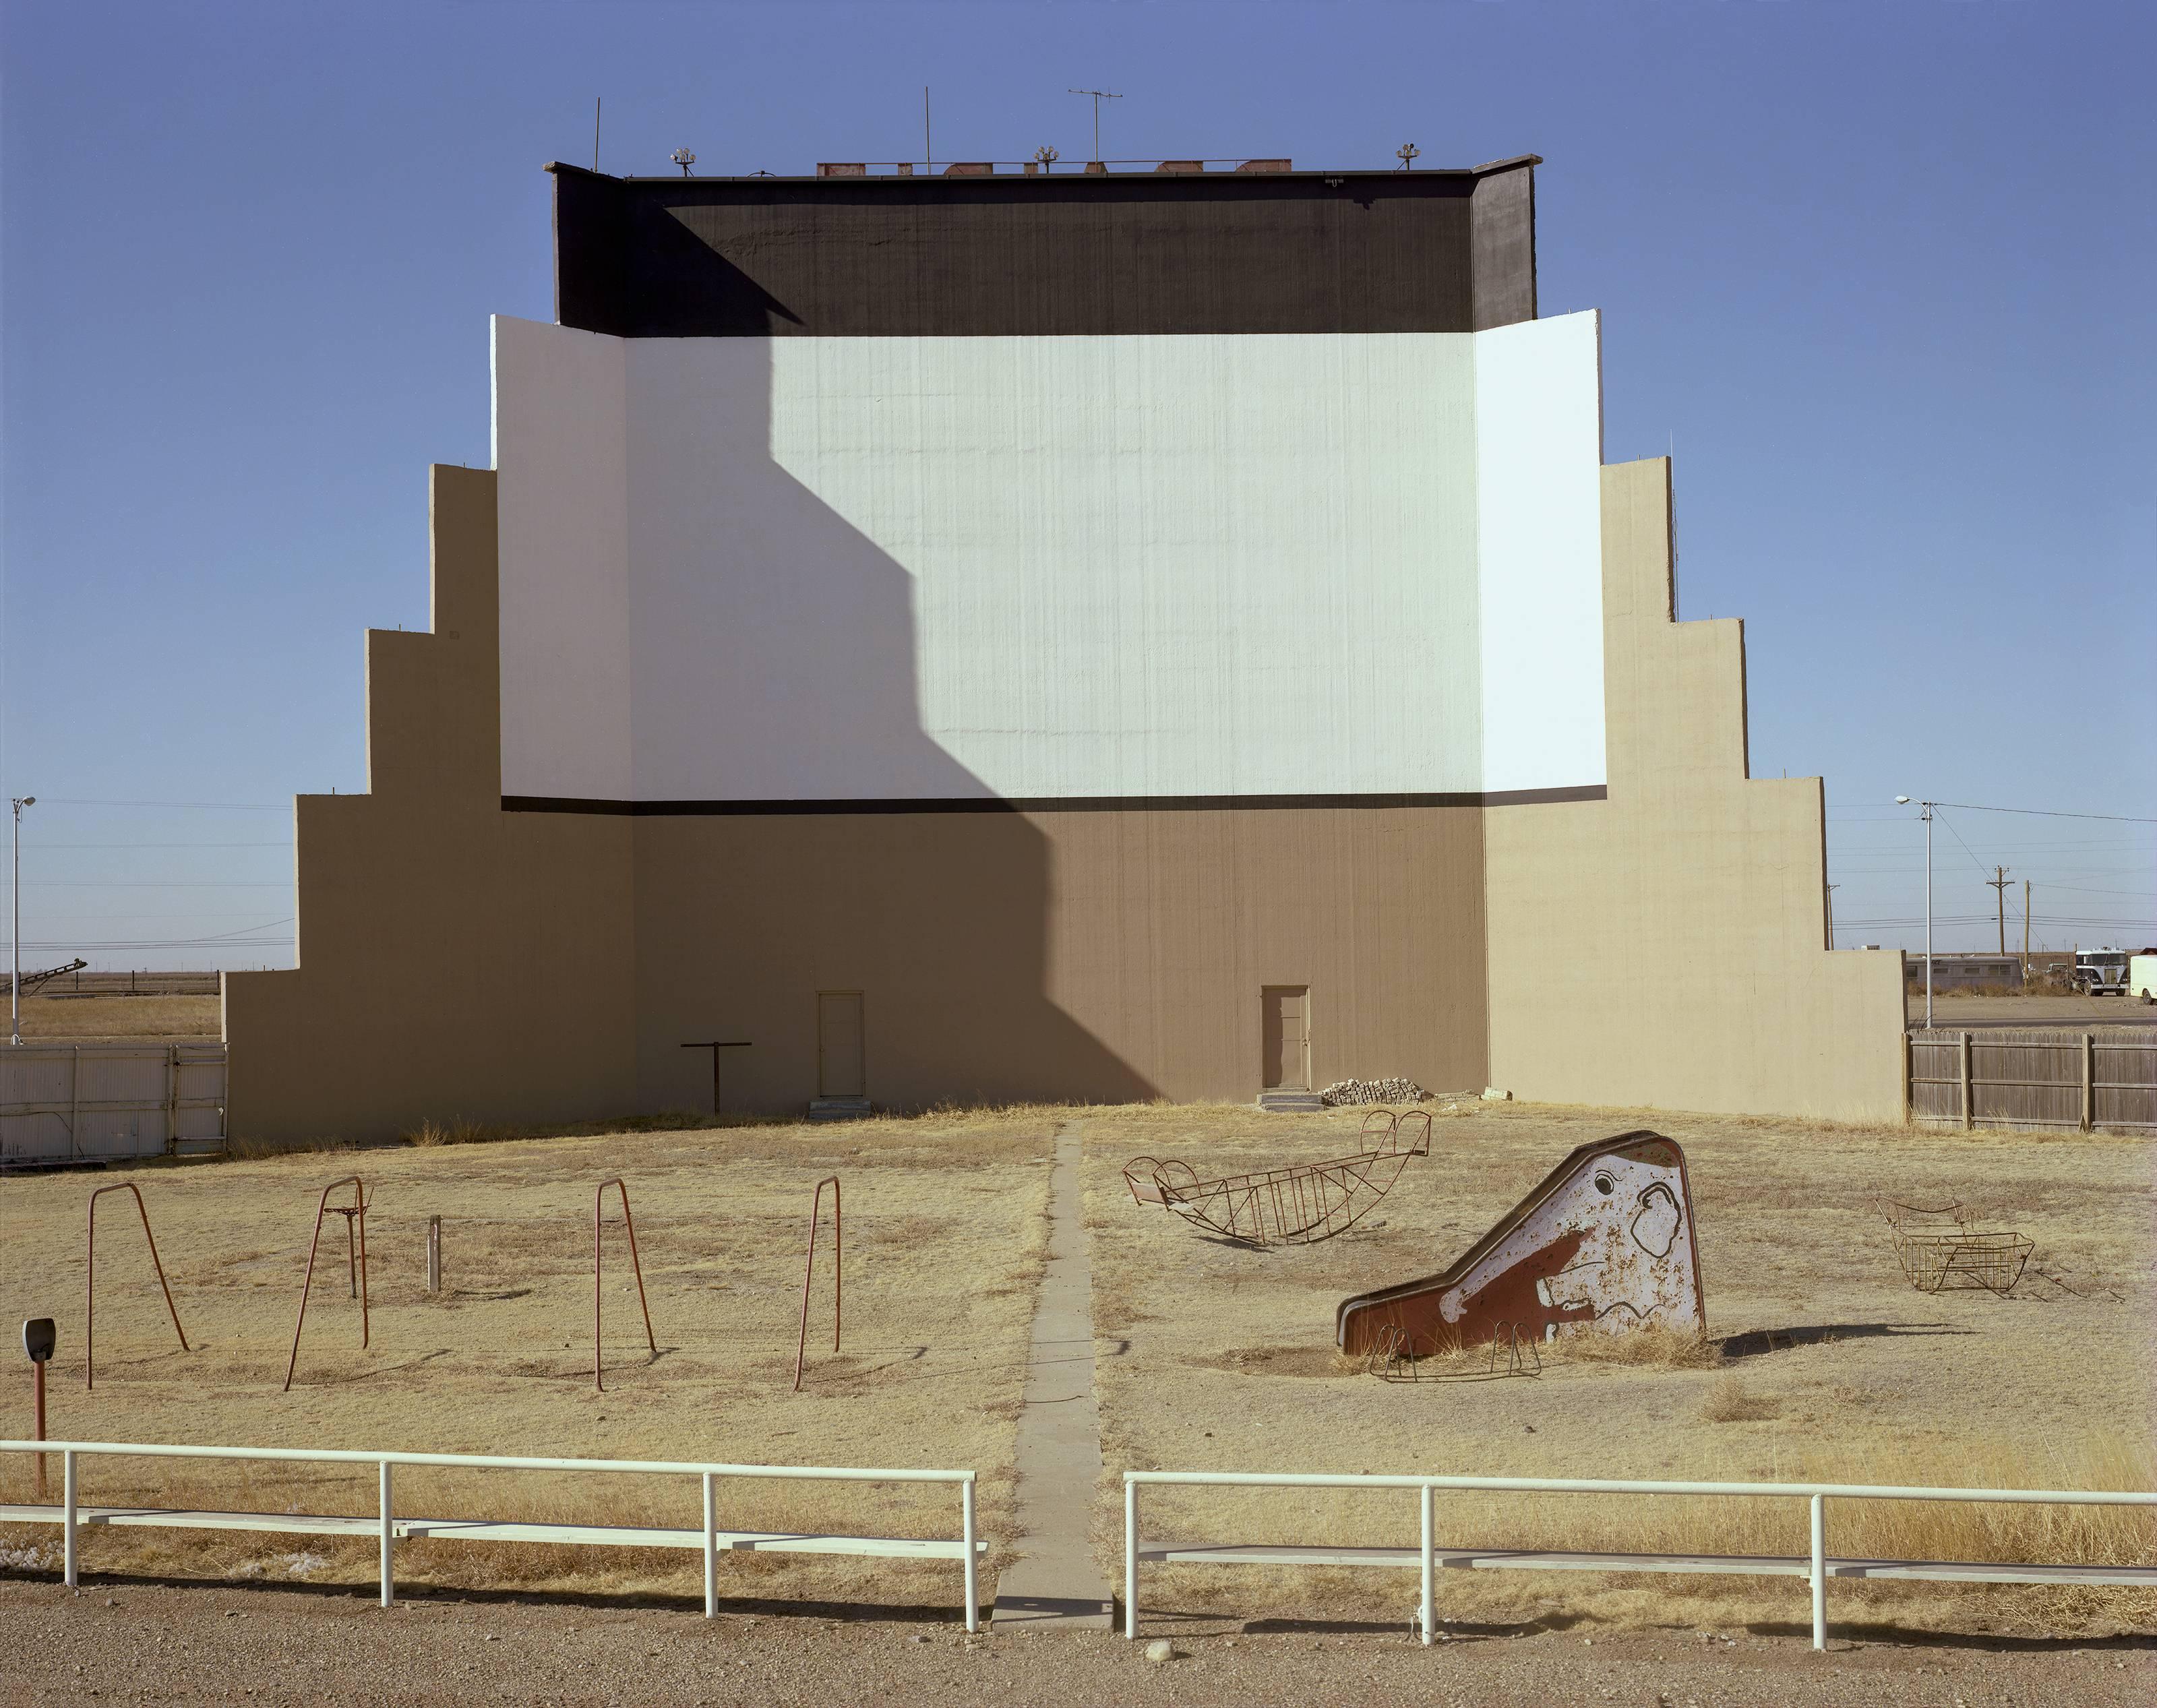 Steve Fitch Color Photograph - Prairie Drive-in theater, Dumas, Texas, January 9, 1981